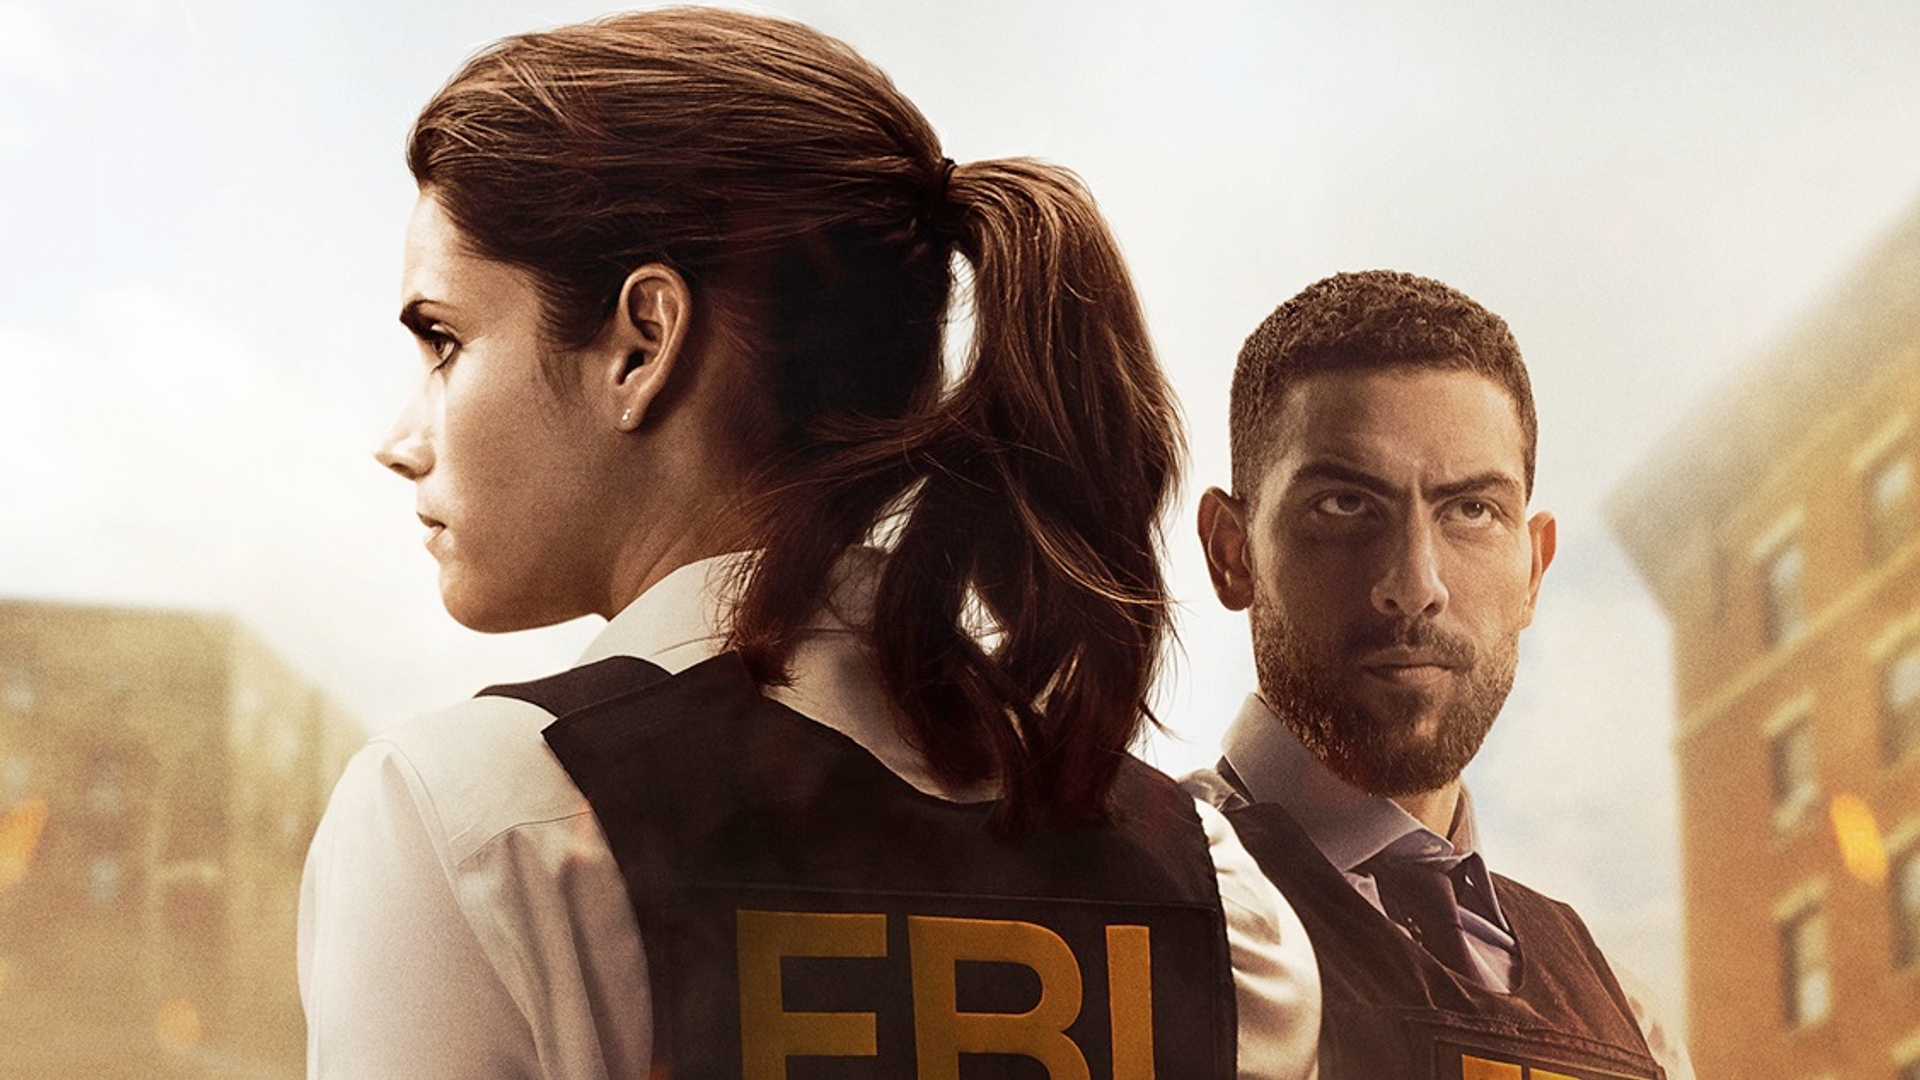 FBI © © NBCUniversal All Rights Reserved